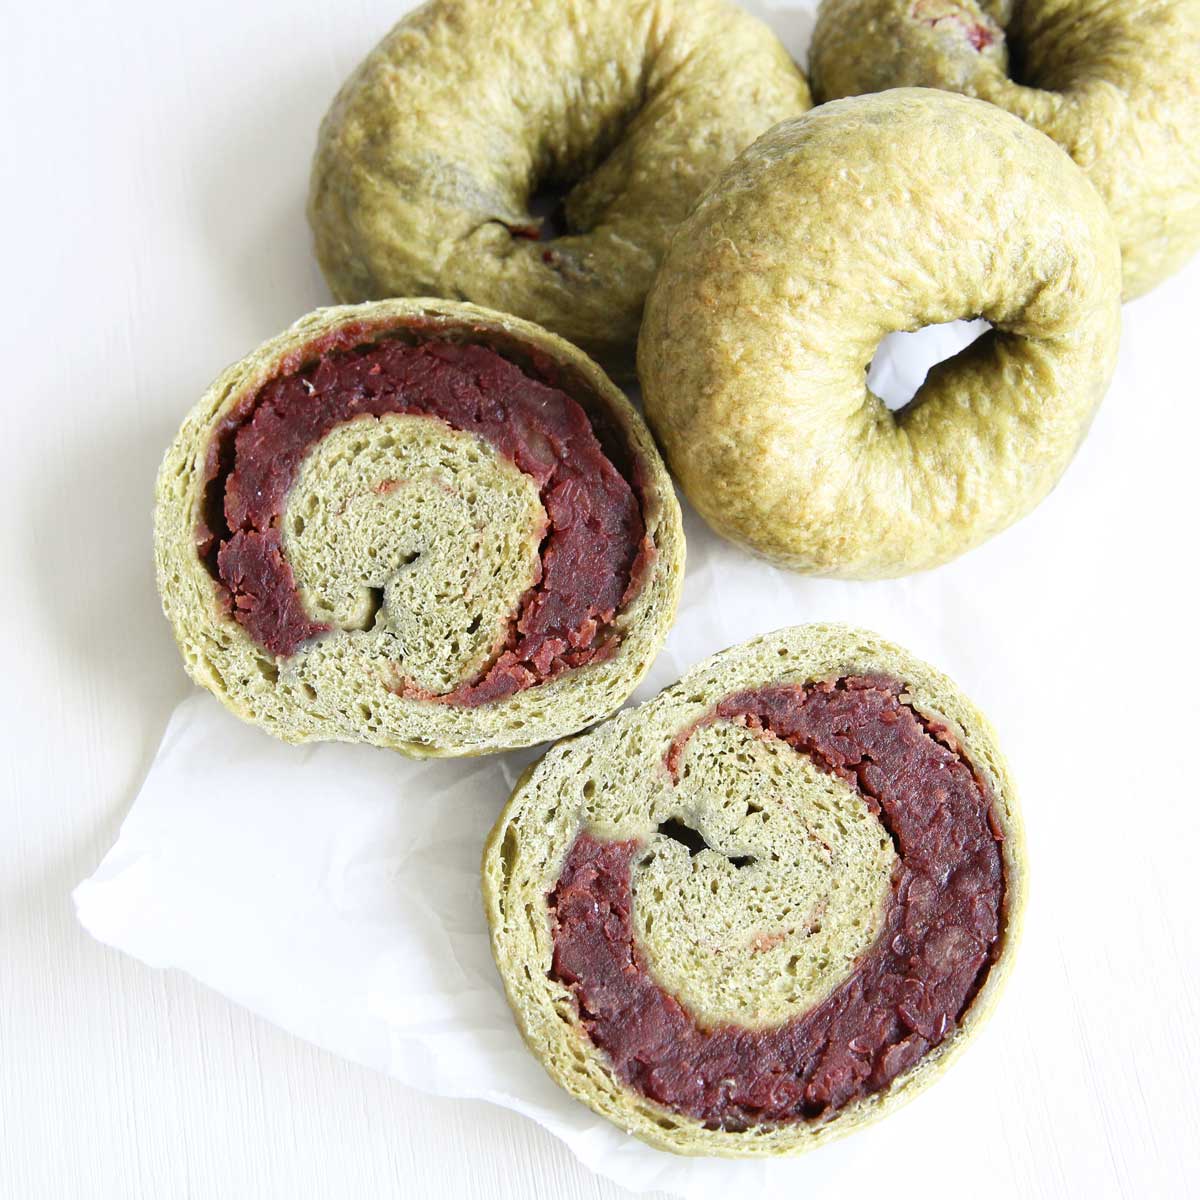 Homemade Applesauce Matcha Bagels with Red Bean Paste Filling - Peanut Clusters with Collagen